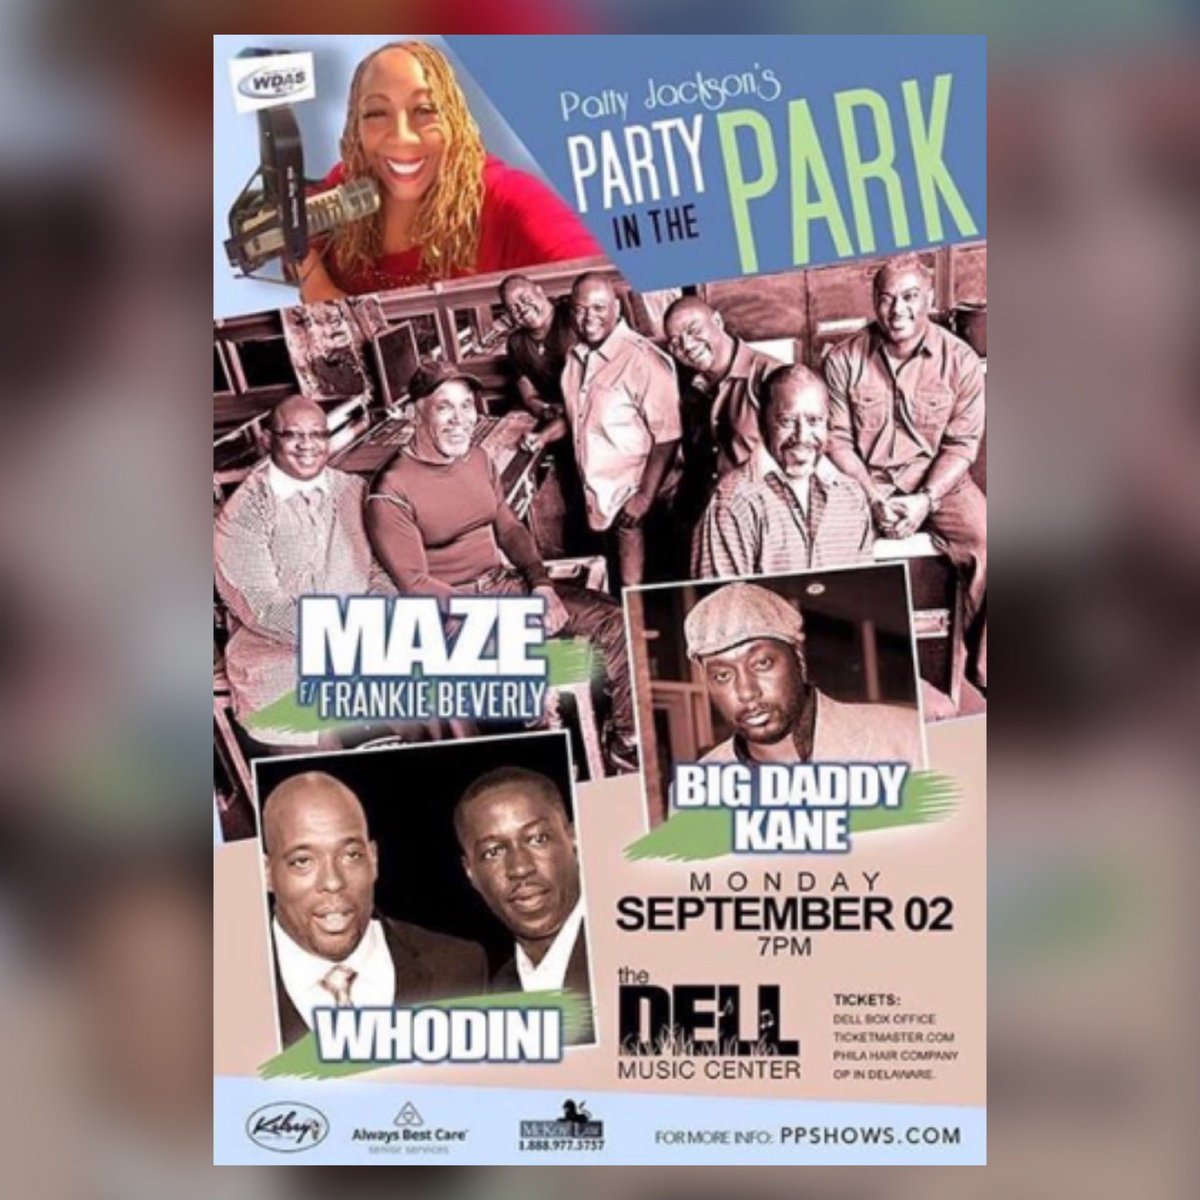 Tonight! Patty Jackson's Party in the Park featuring Maze ft Frankie Beverly, Big Daddy Kane, and Whodini. #Maze #FrankieBeverly #BigDaddyKane #Whodini